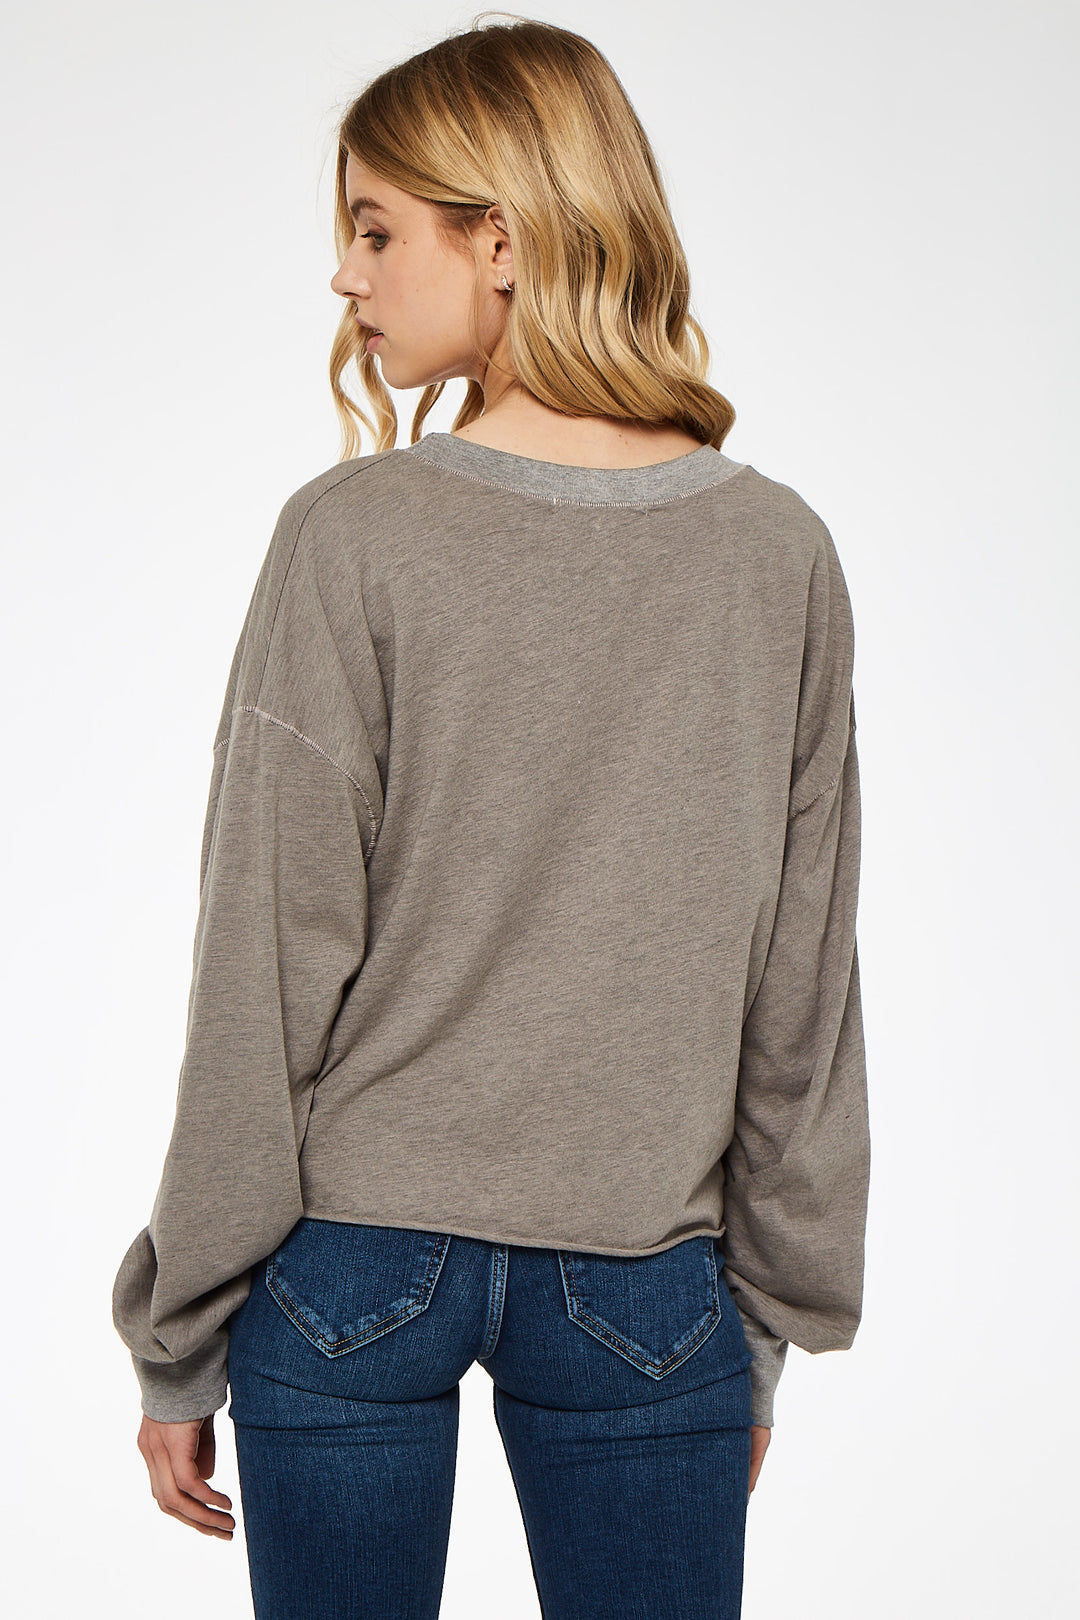 AXEL SLOUCHY TOP - Kingfisher Road - Online Boutique